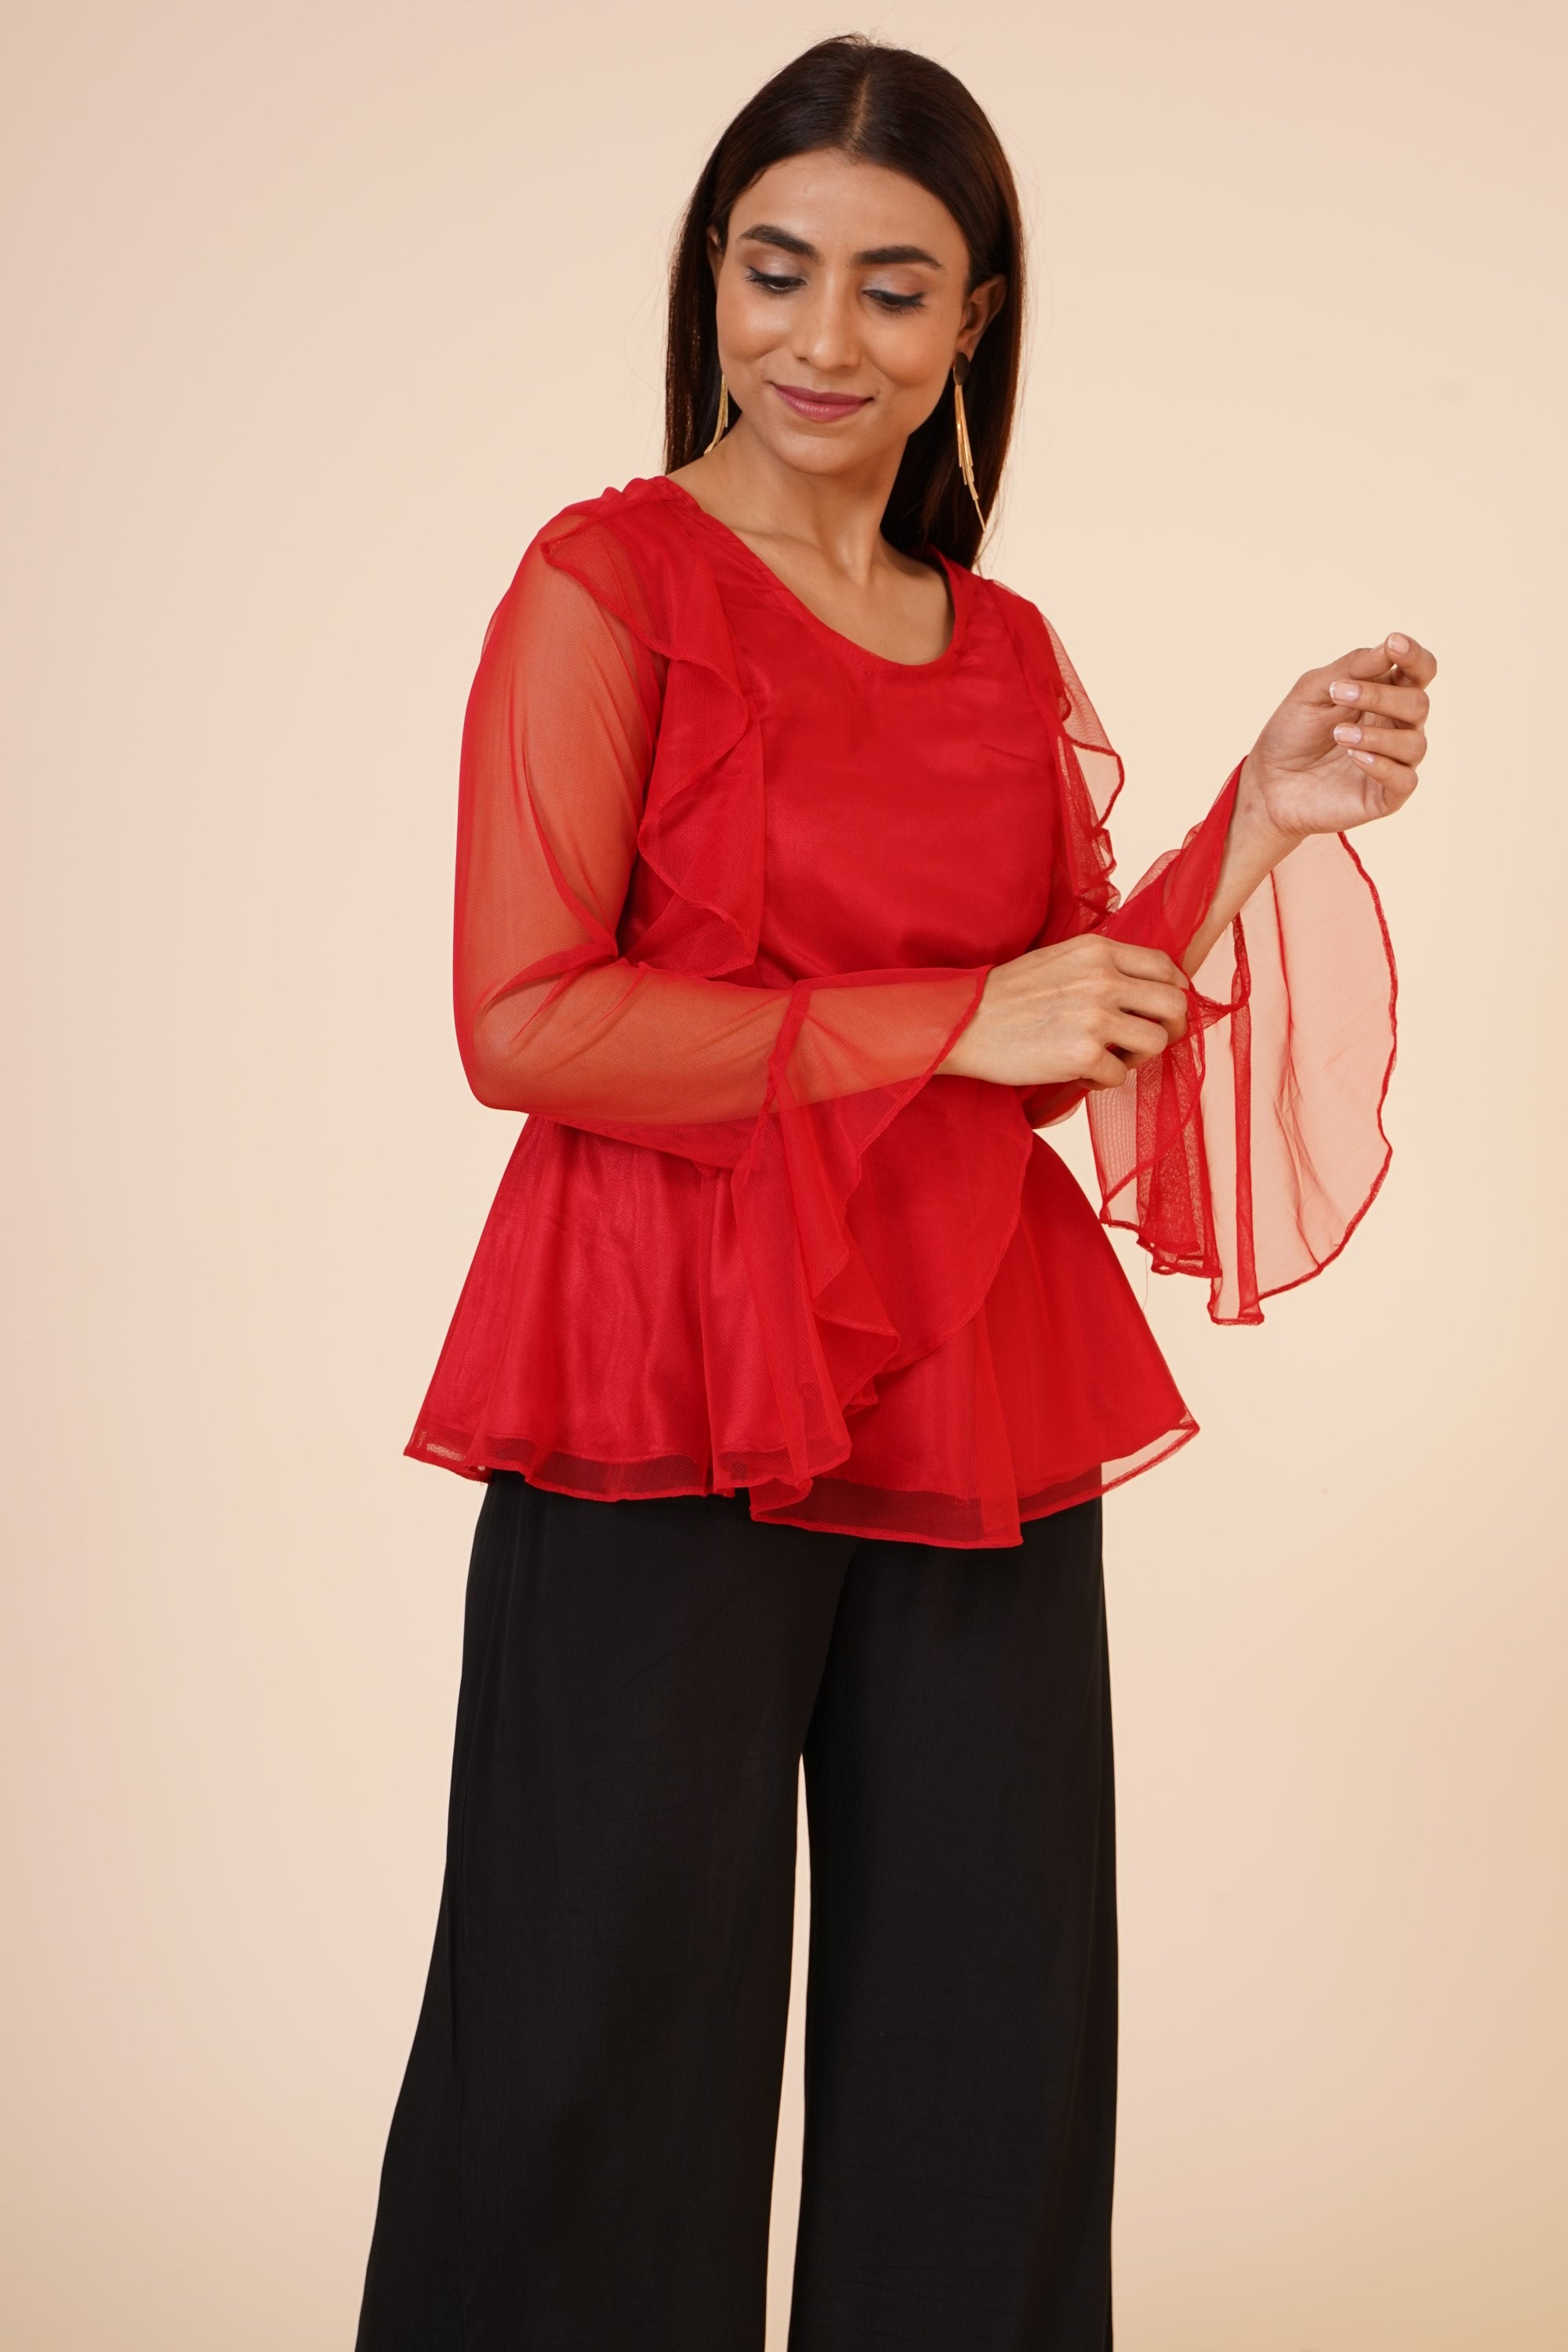 Women's Net Party Long Ruffle Sleeves Top In Red - MIRACOLOS by Ruchi